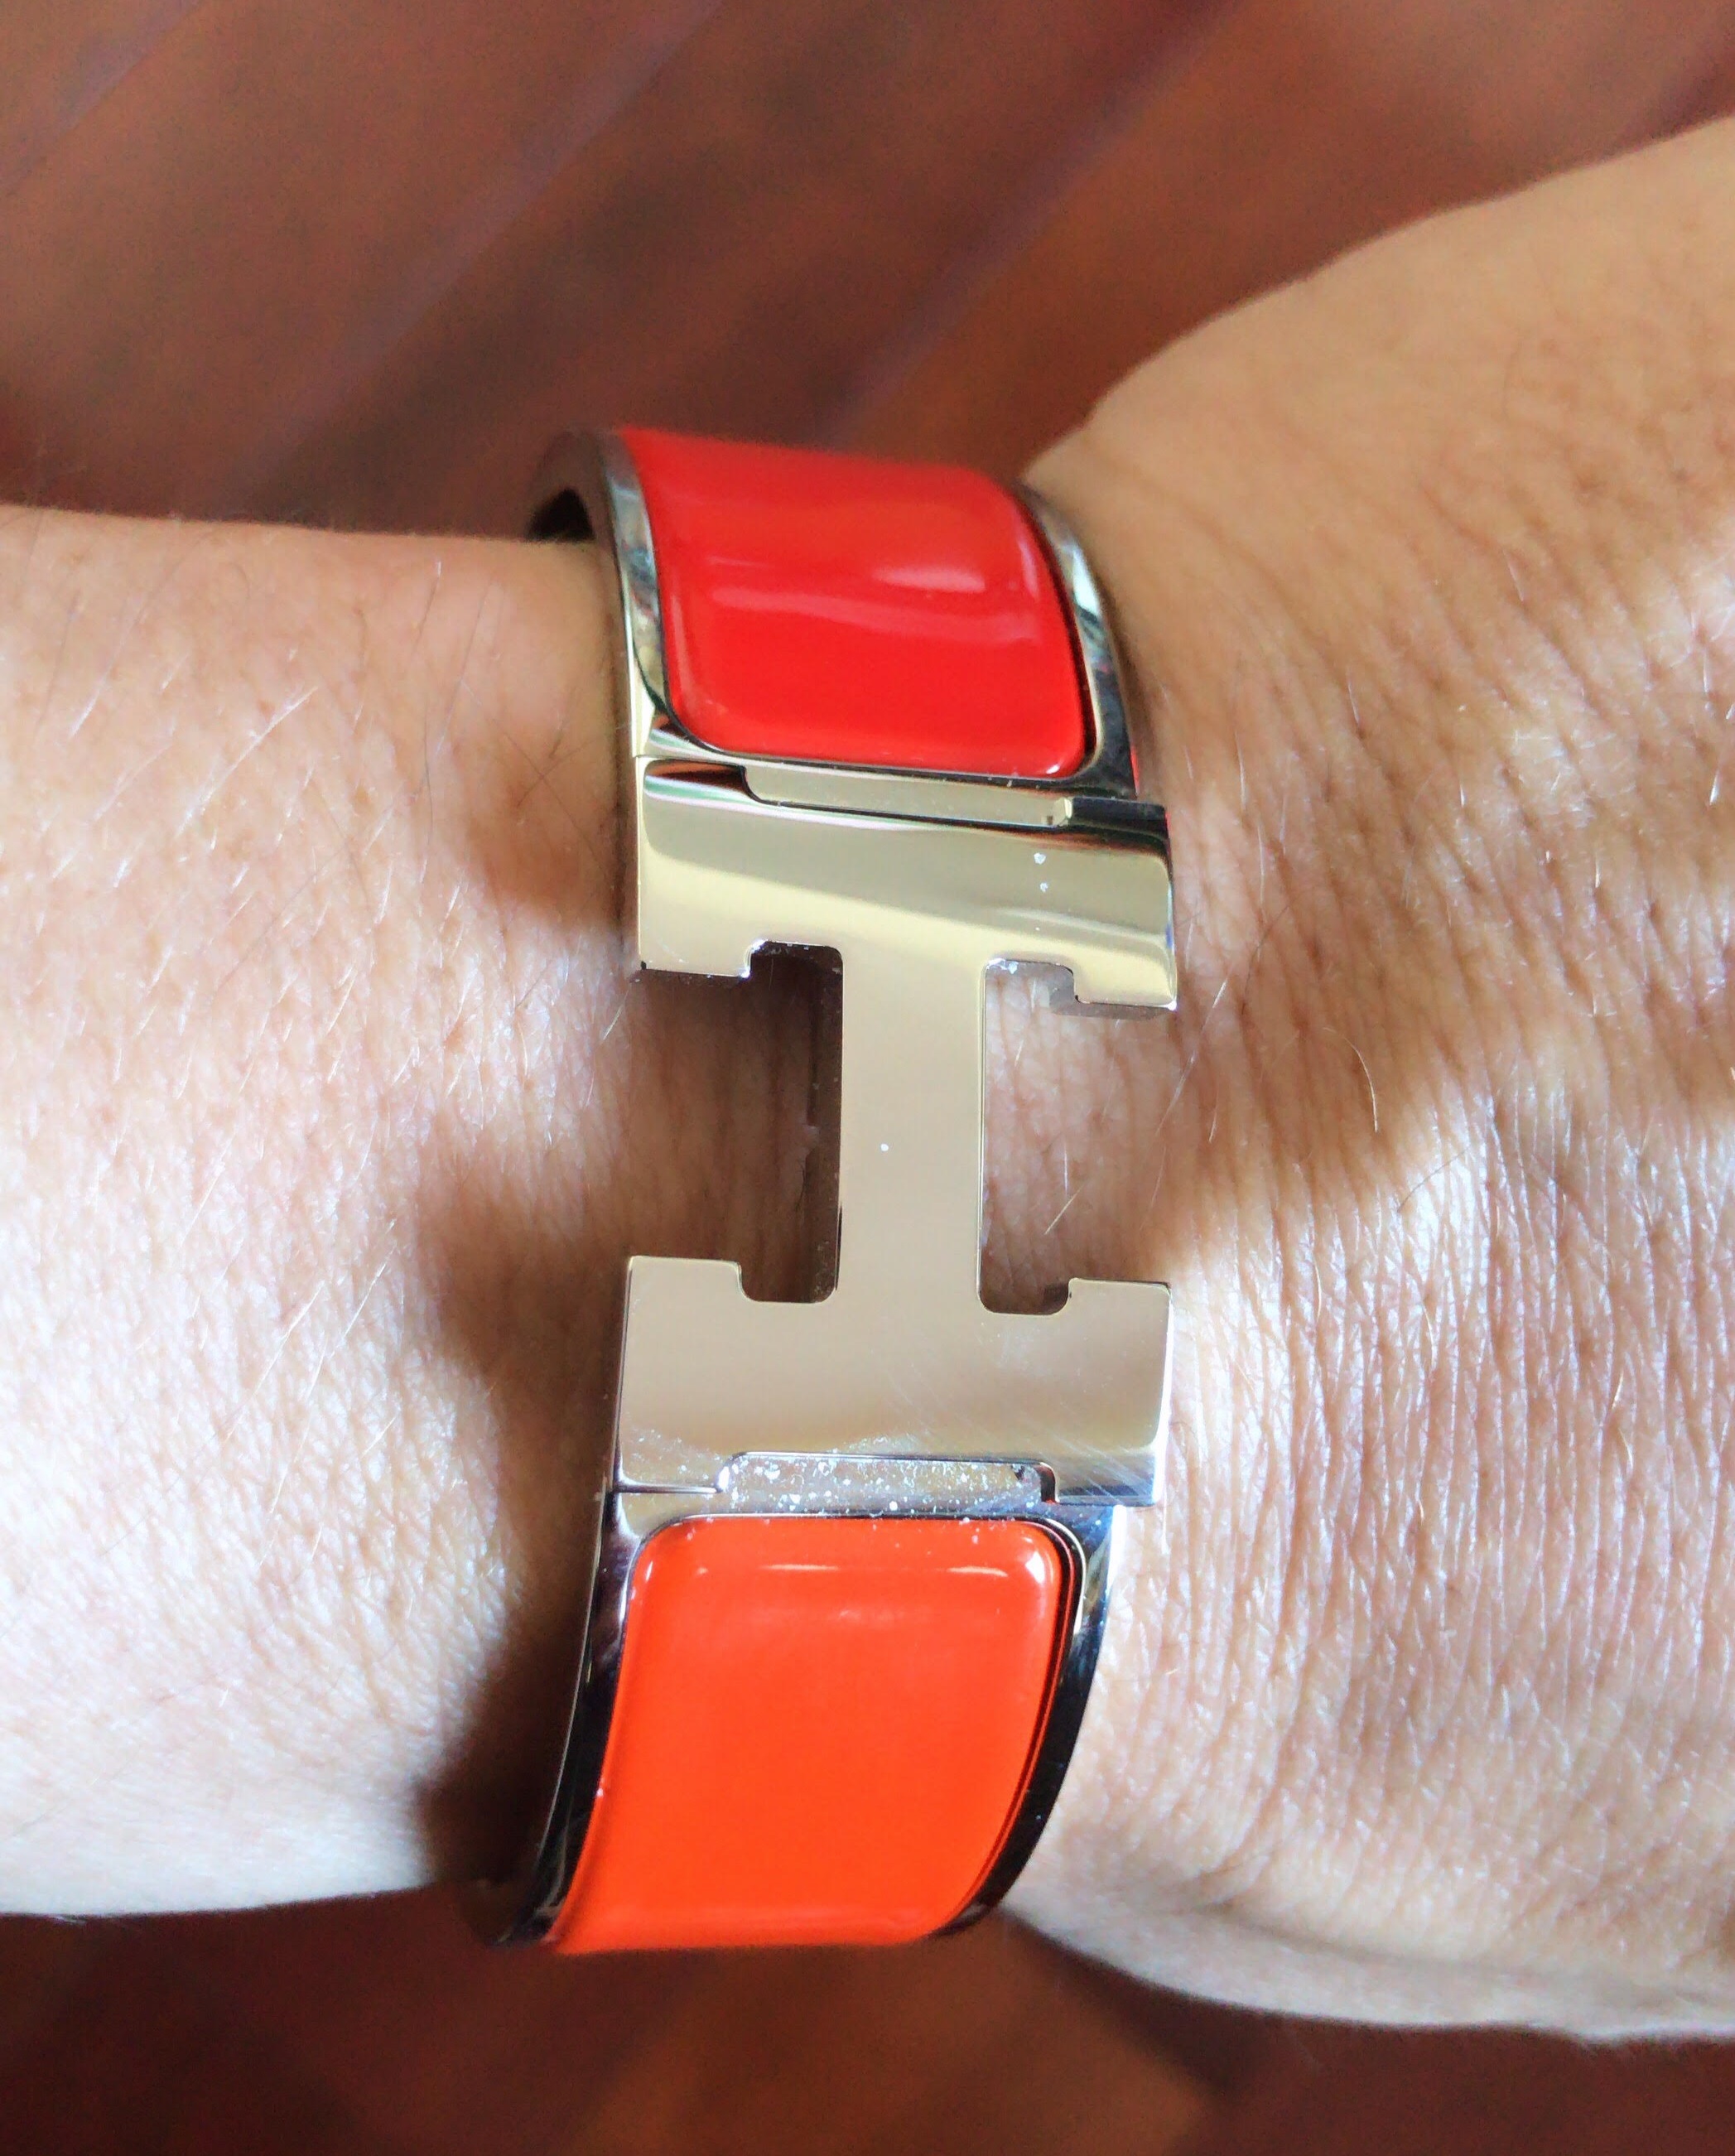 Anemone fisk melodisk Statistisk The NEW Hermes Bi-Color Clic Clac Review — Collecting Luxury